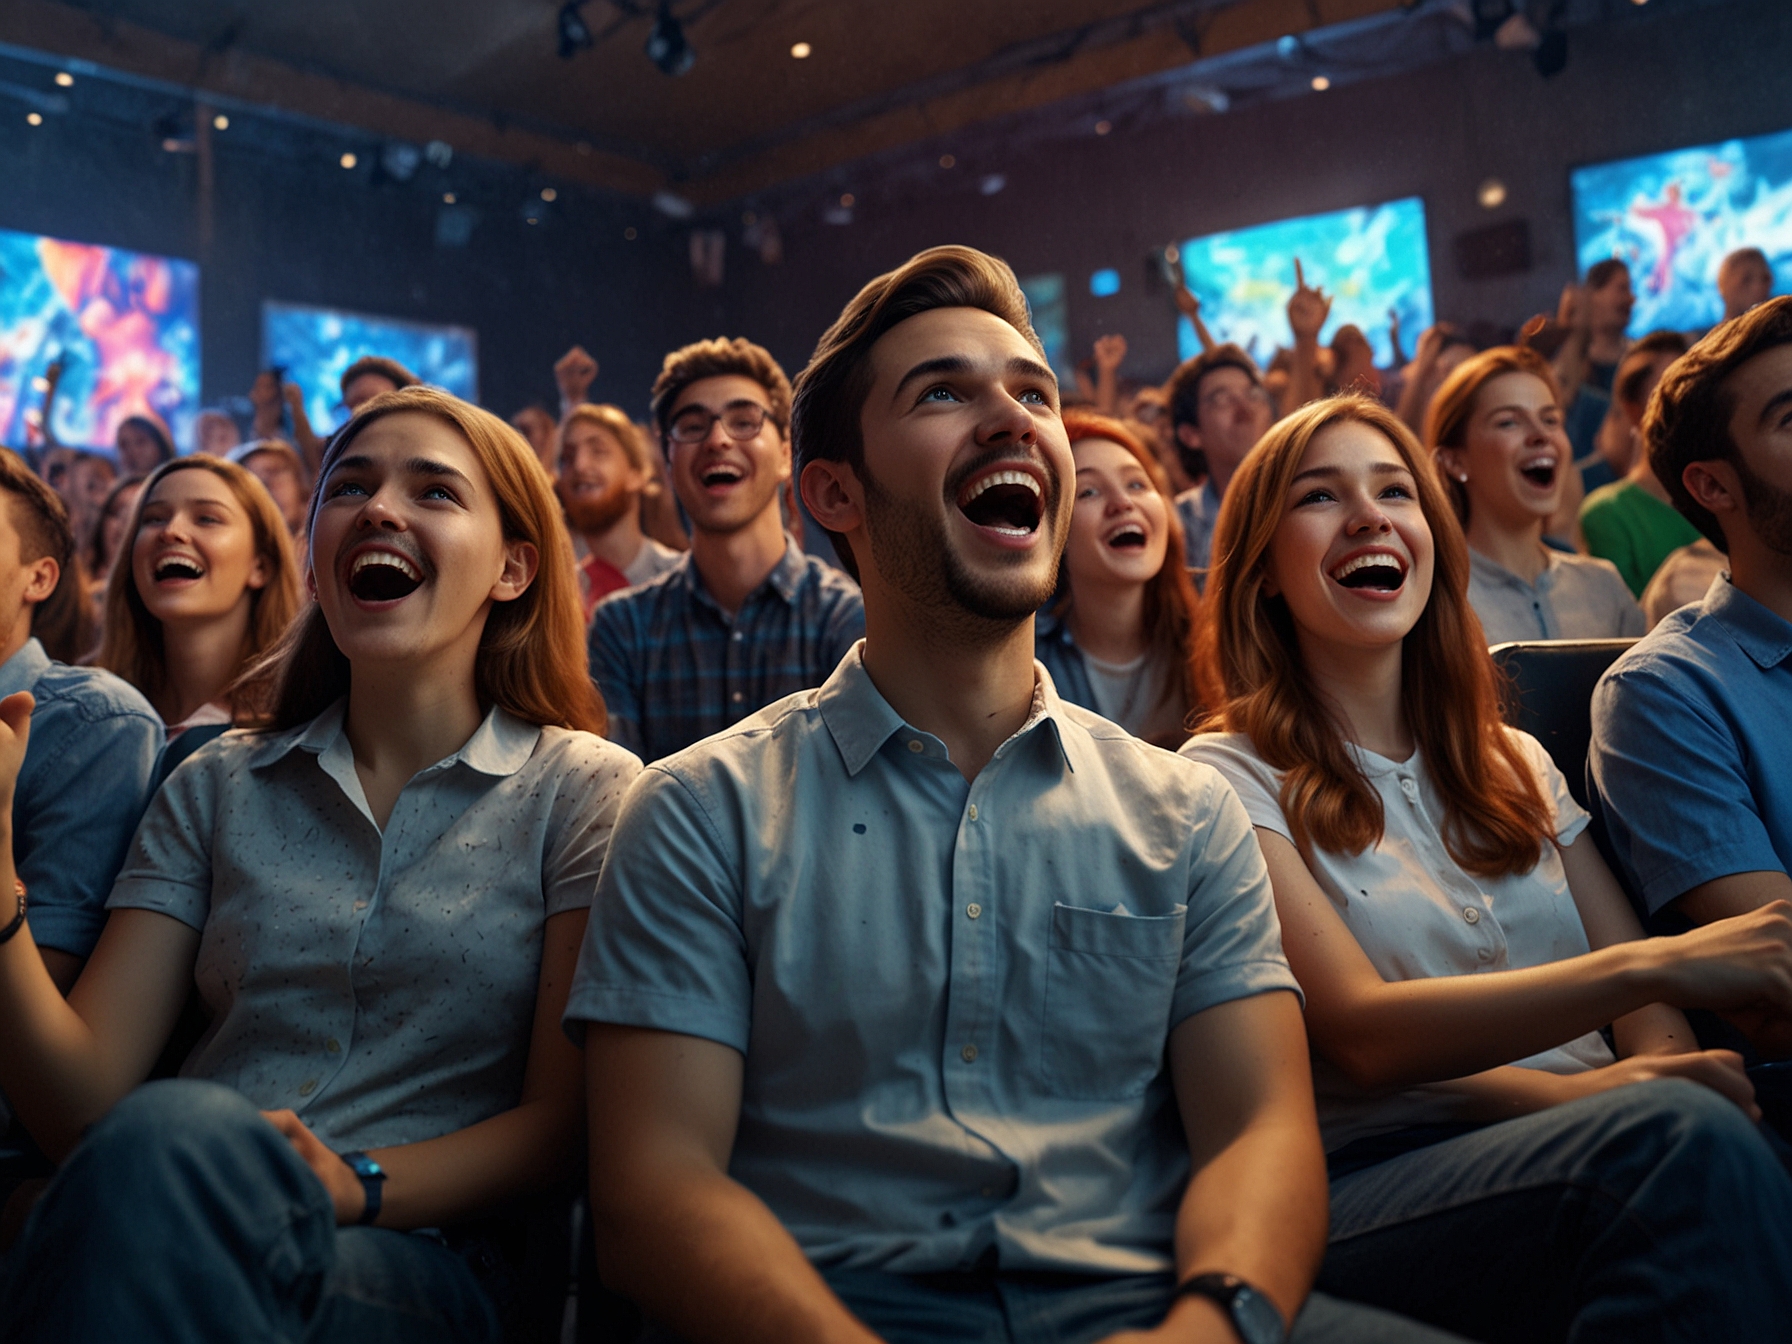 An excited audience watching screens at a gaming showcase event, capturing the vibrant energy and anticipation of new game announcements.